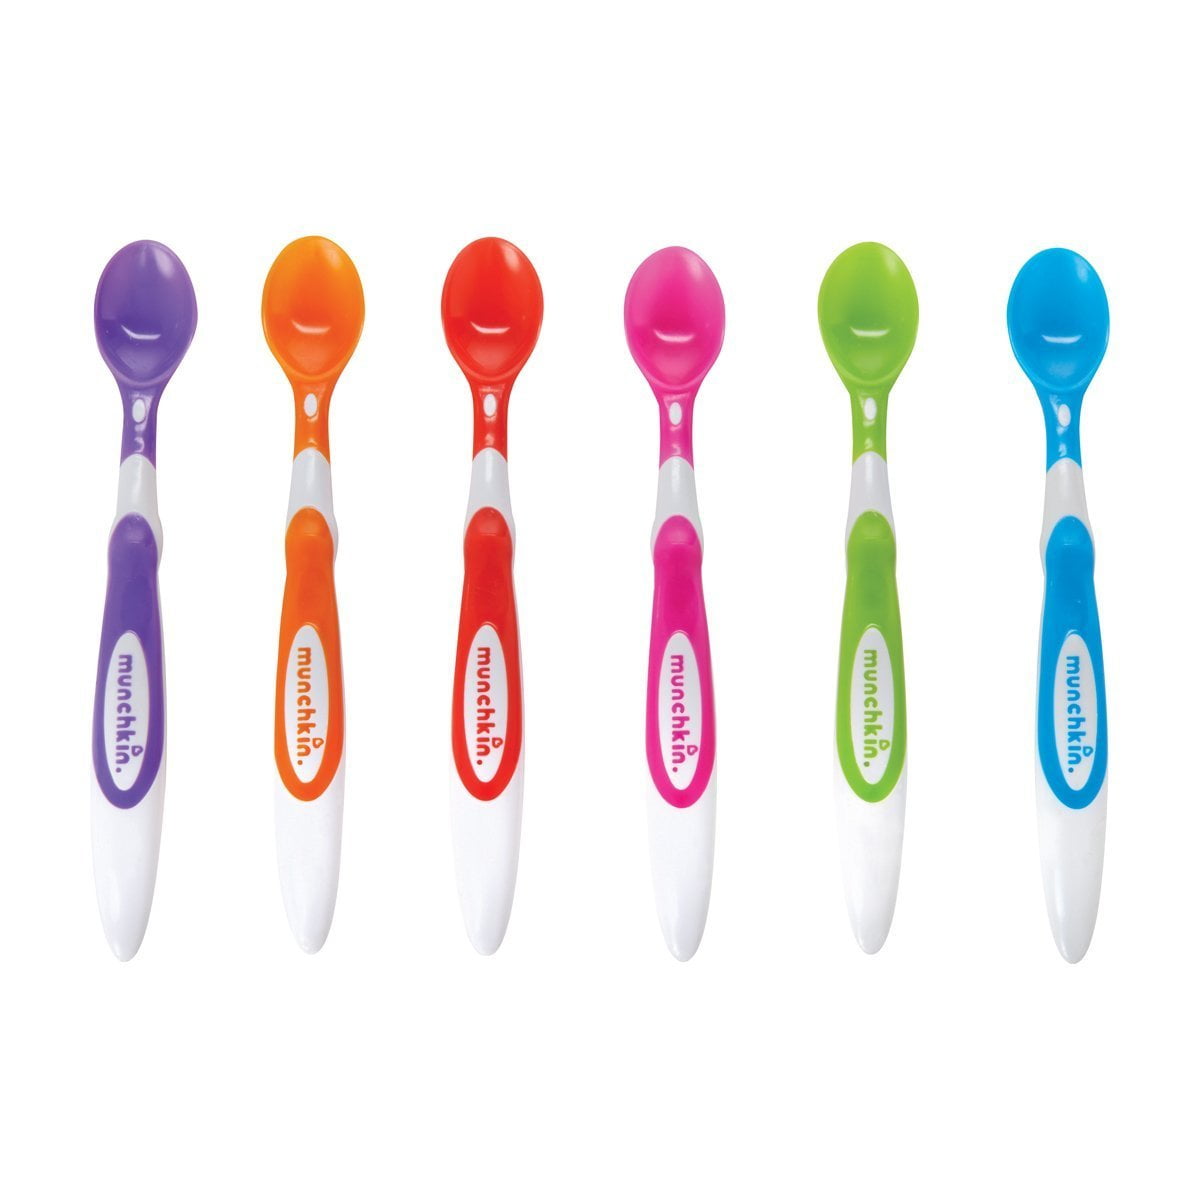 Munchkin Soft-Tip Infant Plastic colored spoons, 6 Pack 